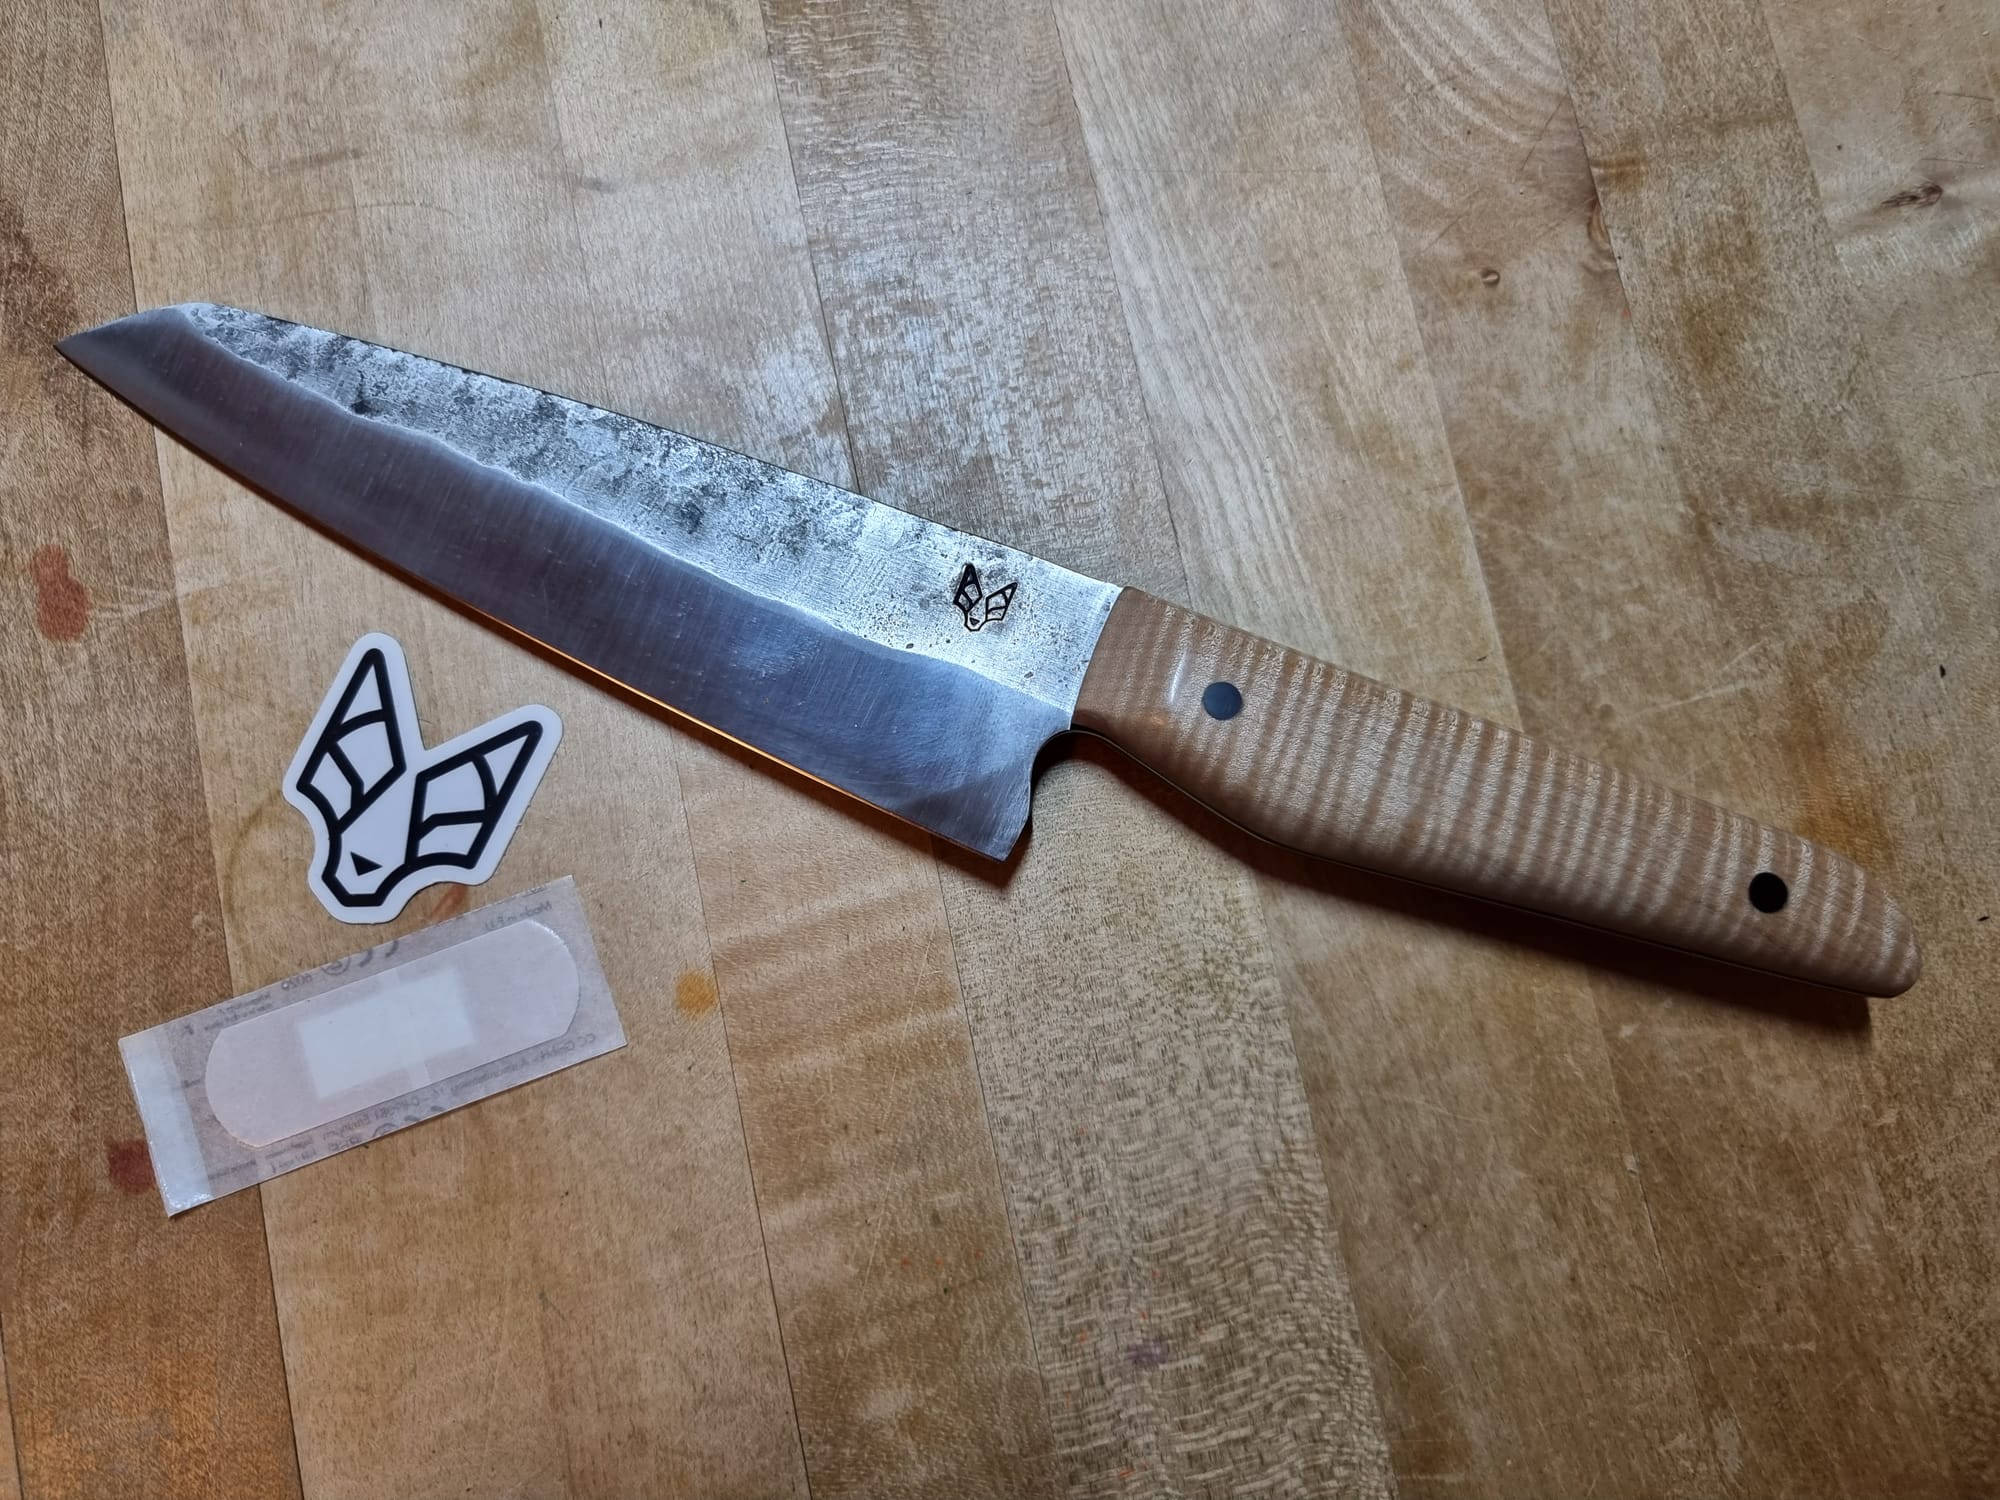 A kitchen-knife with a wooden handle on a wooden table. Next to it a sticker with maker's logo (a stylised fox?) and a band-aid.